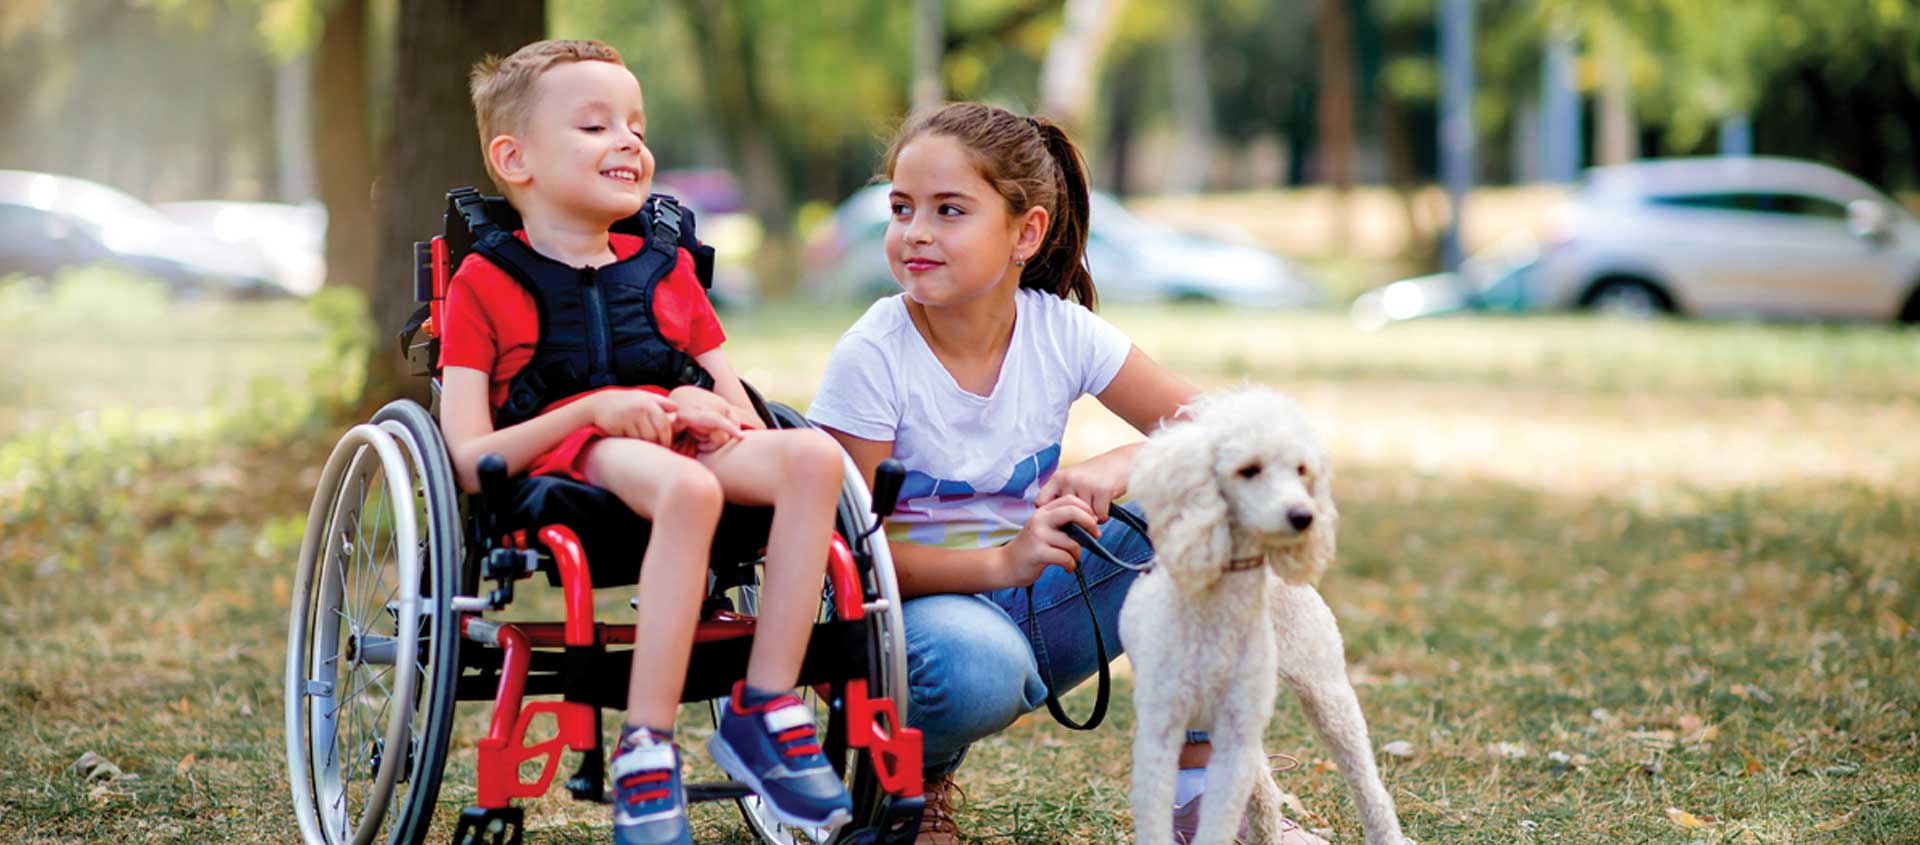 A school-aged Caucasian girl crouches next to a younger Caucasian boy who uses a red wheelchair.